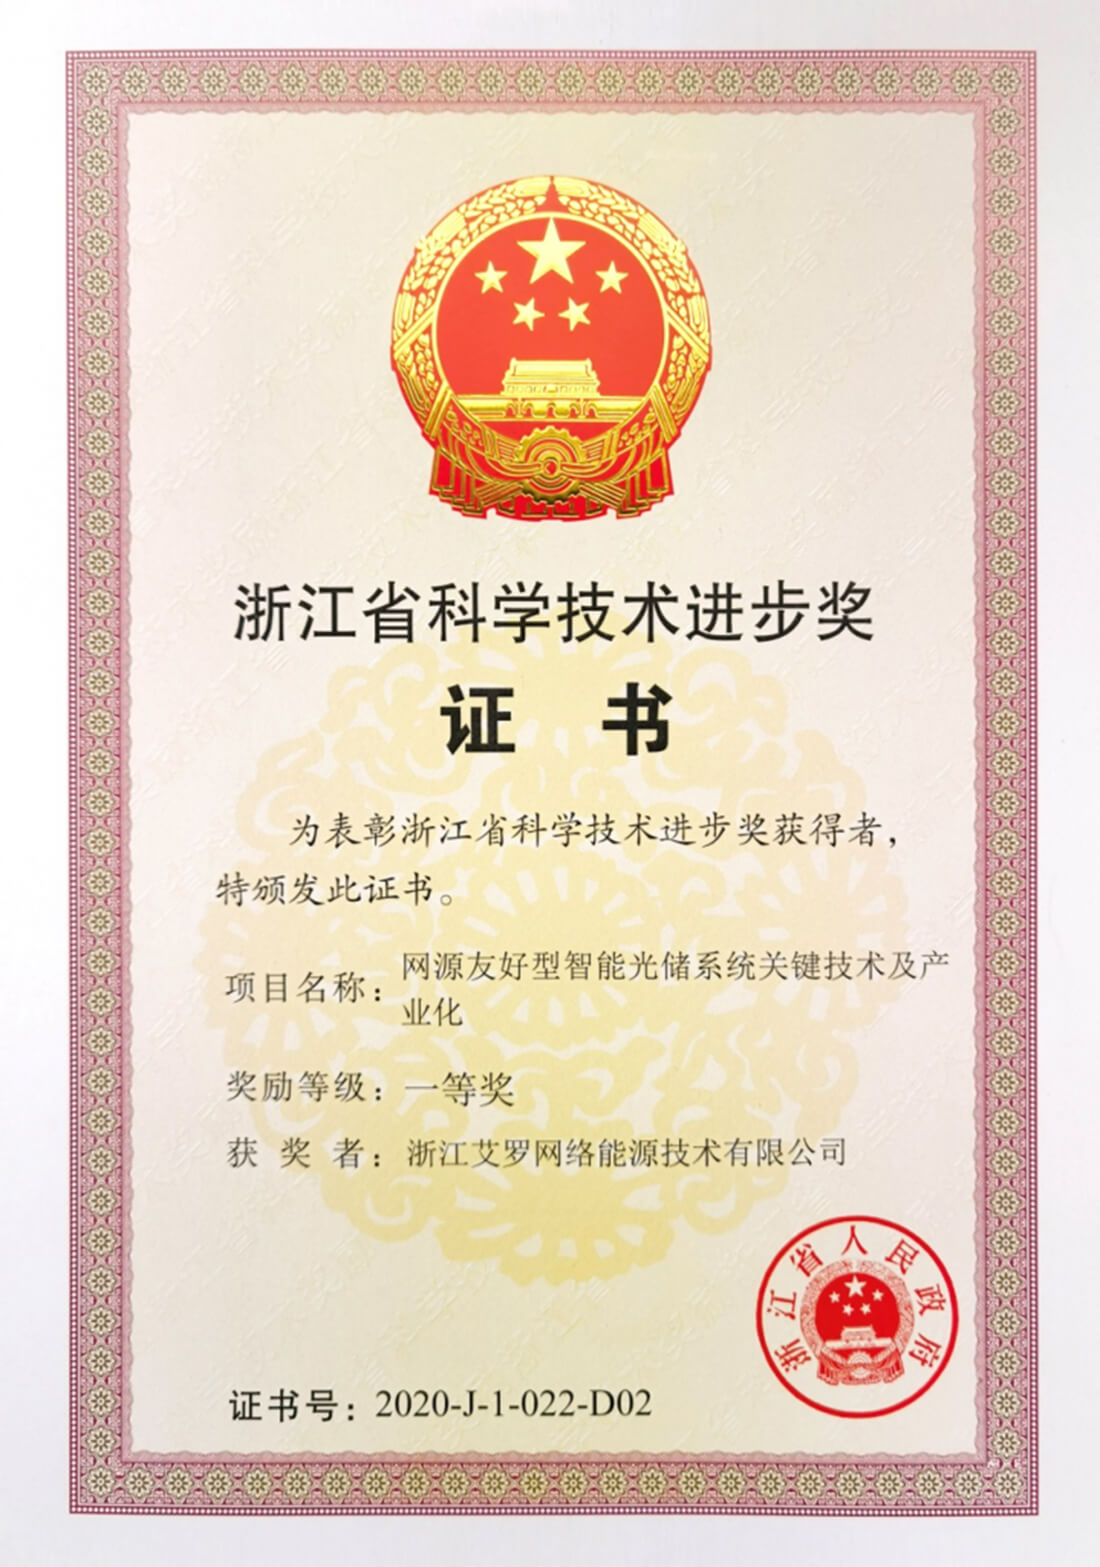 Breakthrough! SolaX Smart PV-Energy Storage System Won the First Prize of Zhejiang Science and Technology Progress Award of 2020